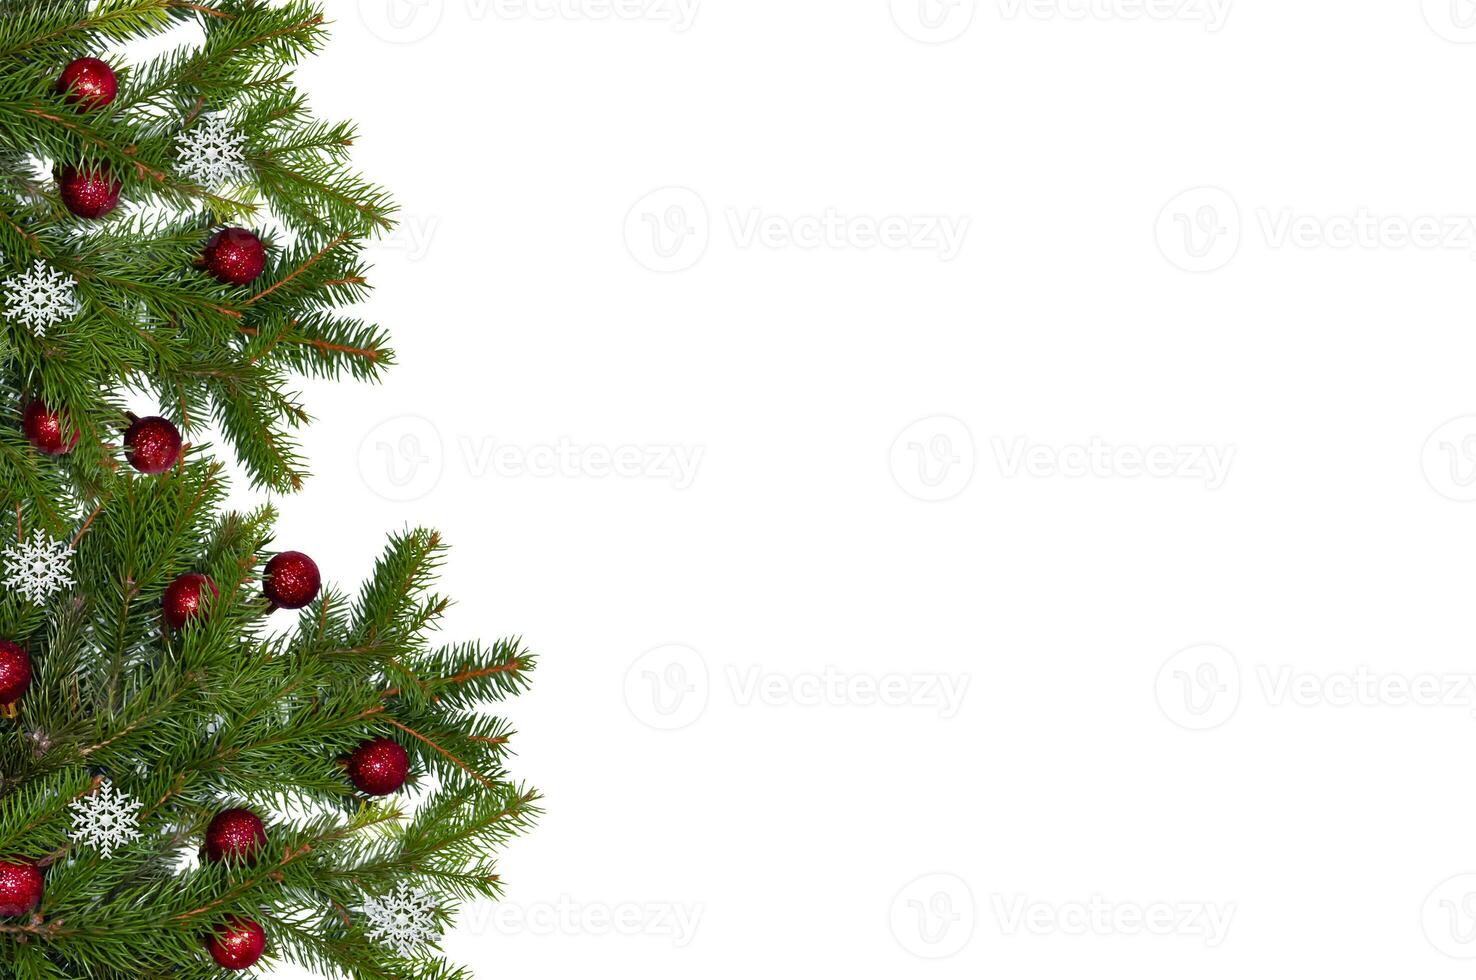 Christmas branch of a natural tree with red balls on a white background close-up. Isolate photo